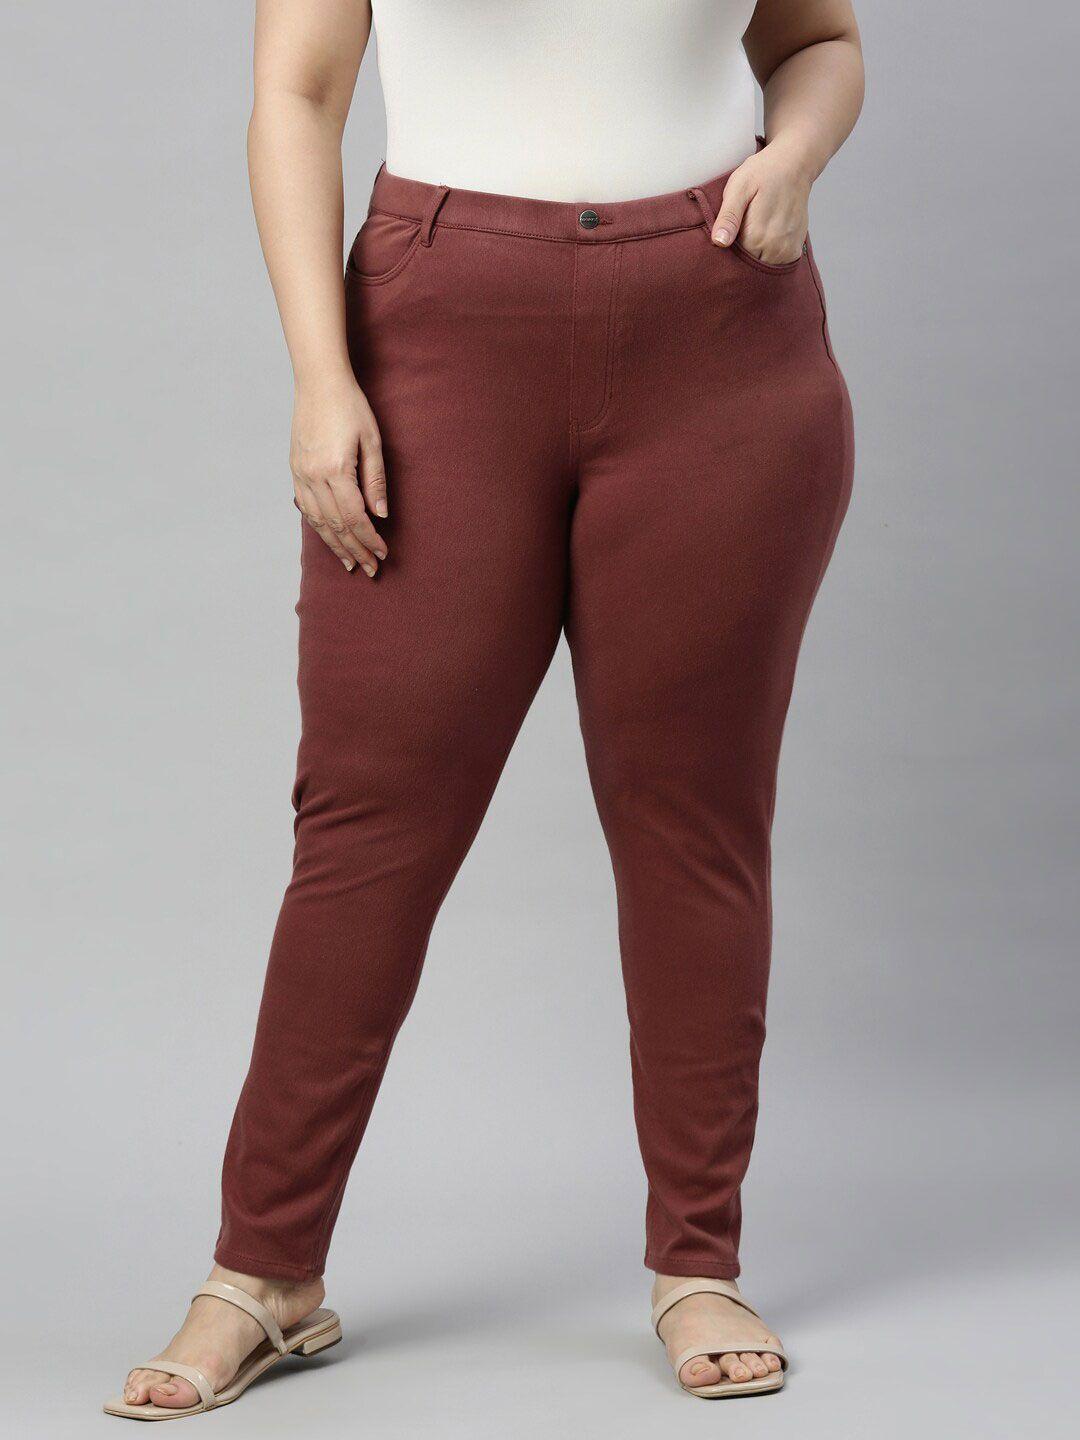 go-colors-women-rust-brown-solid-super-stretch-slim-fit-jeggings